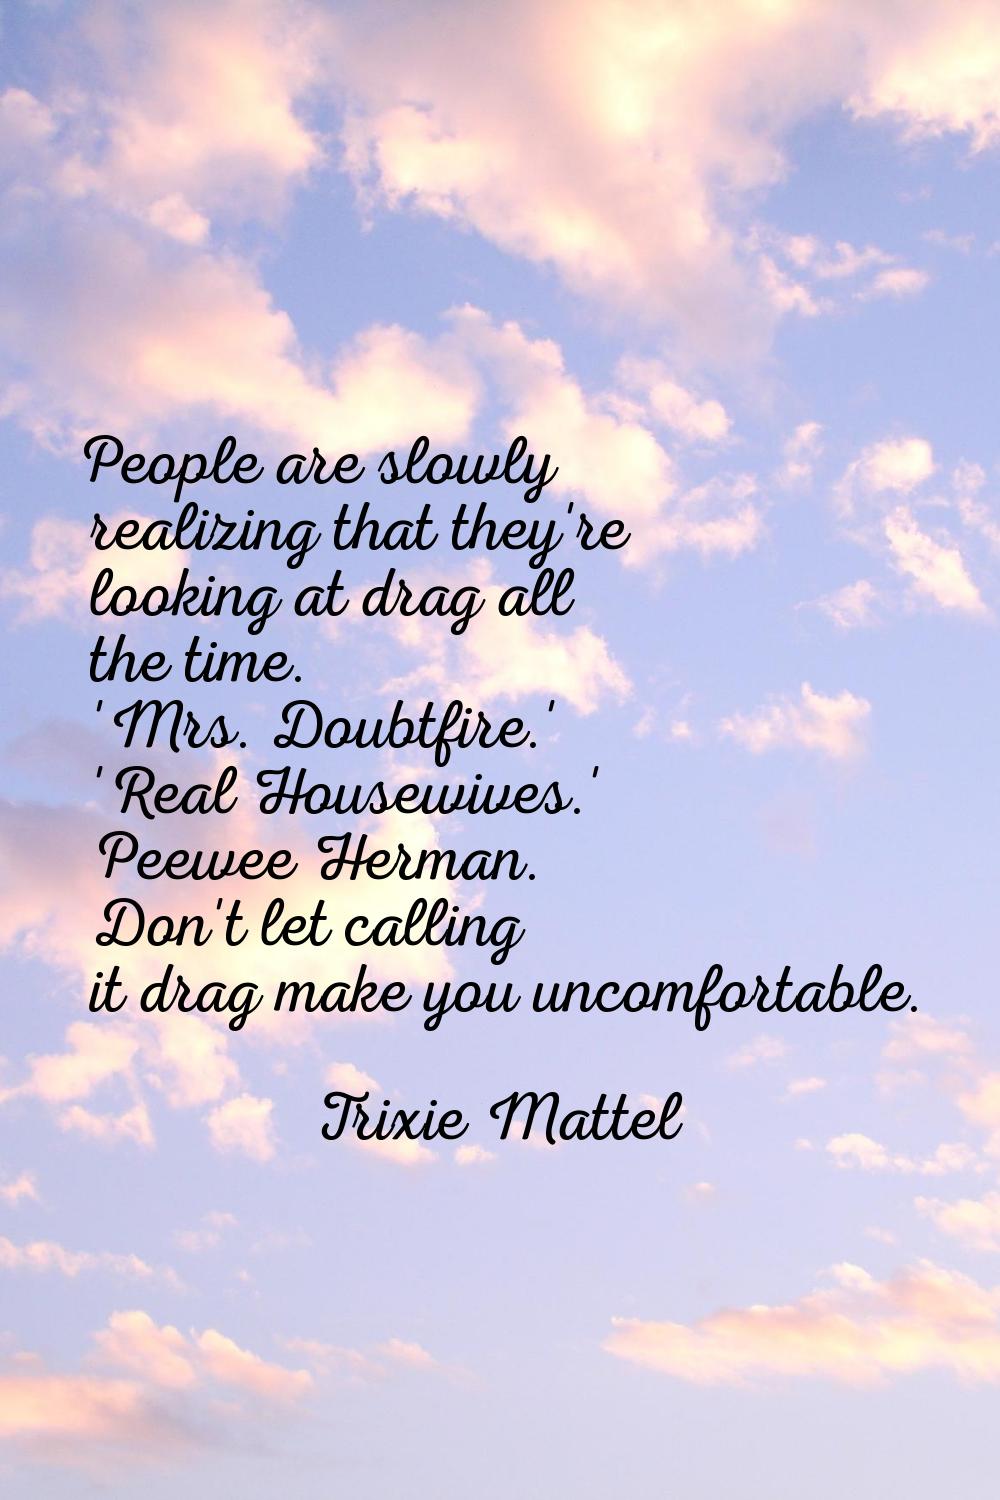 People are slowly realizing that they're looking at drag all the time. 'Mrs. Doubtfire.' 'Real Hous